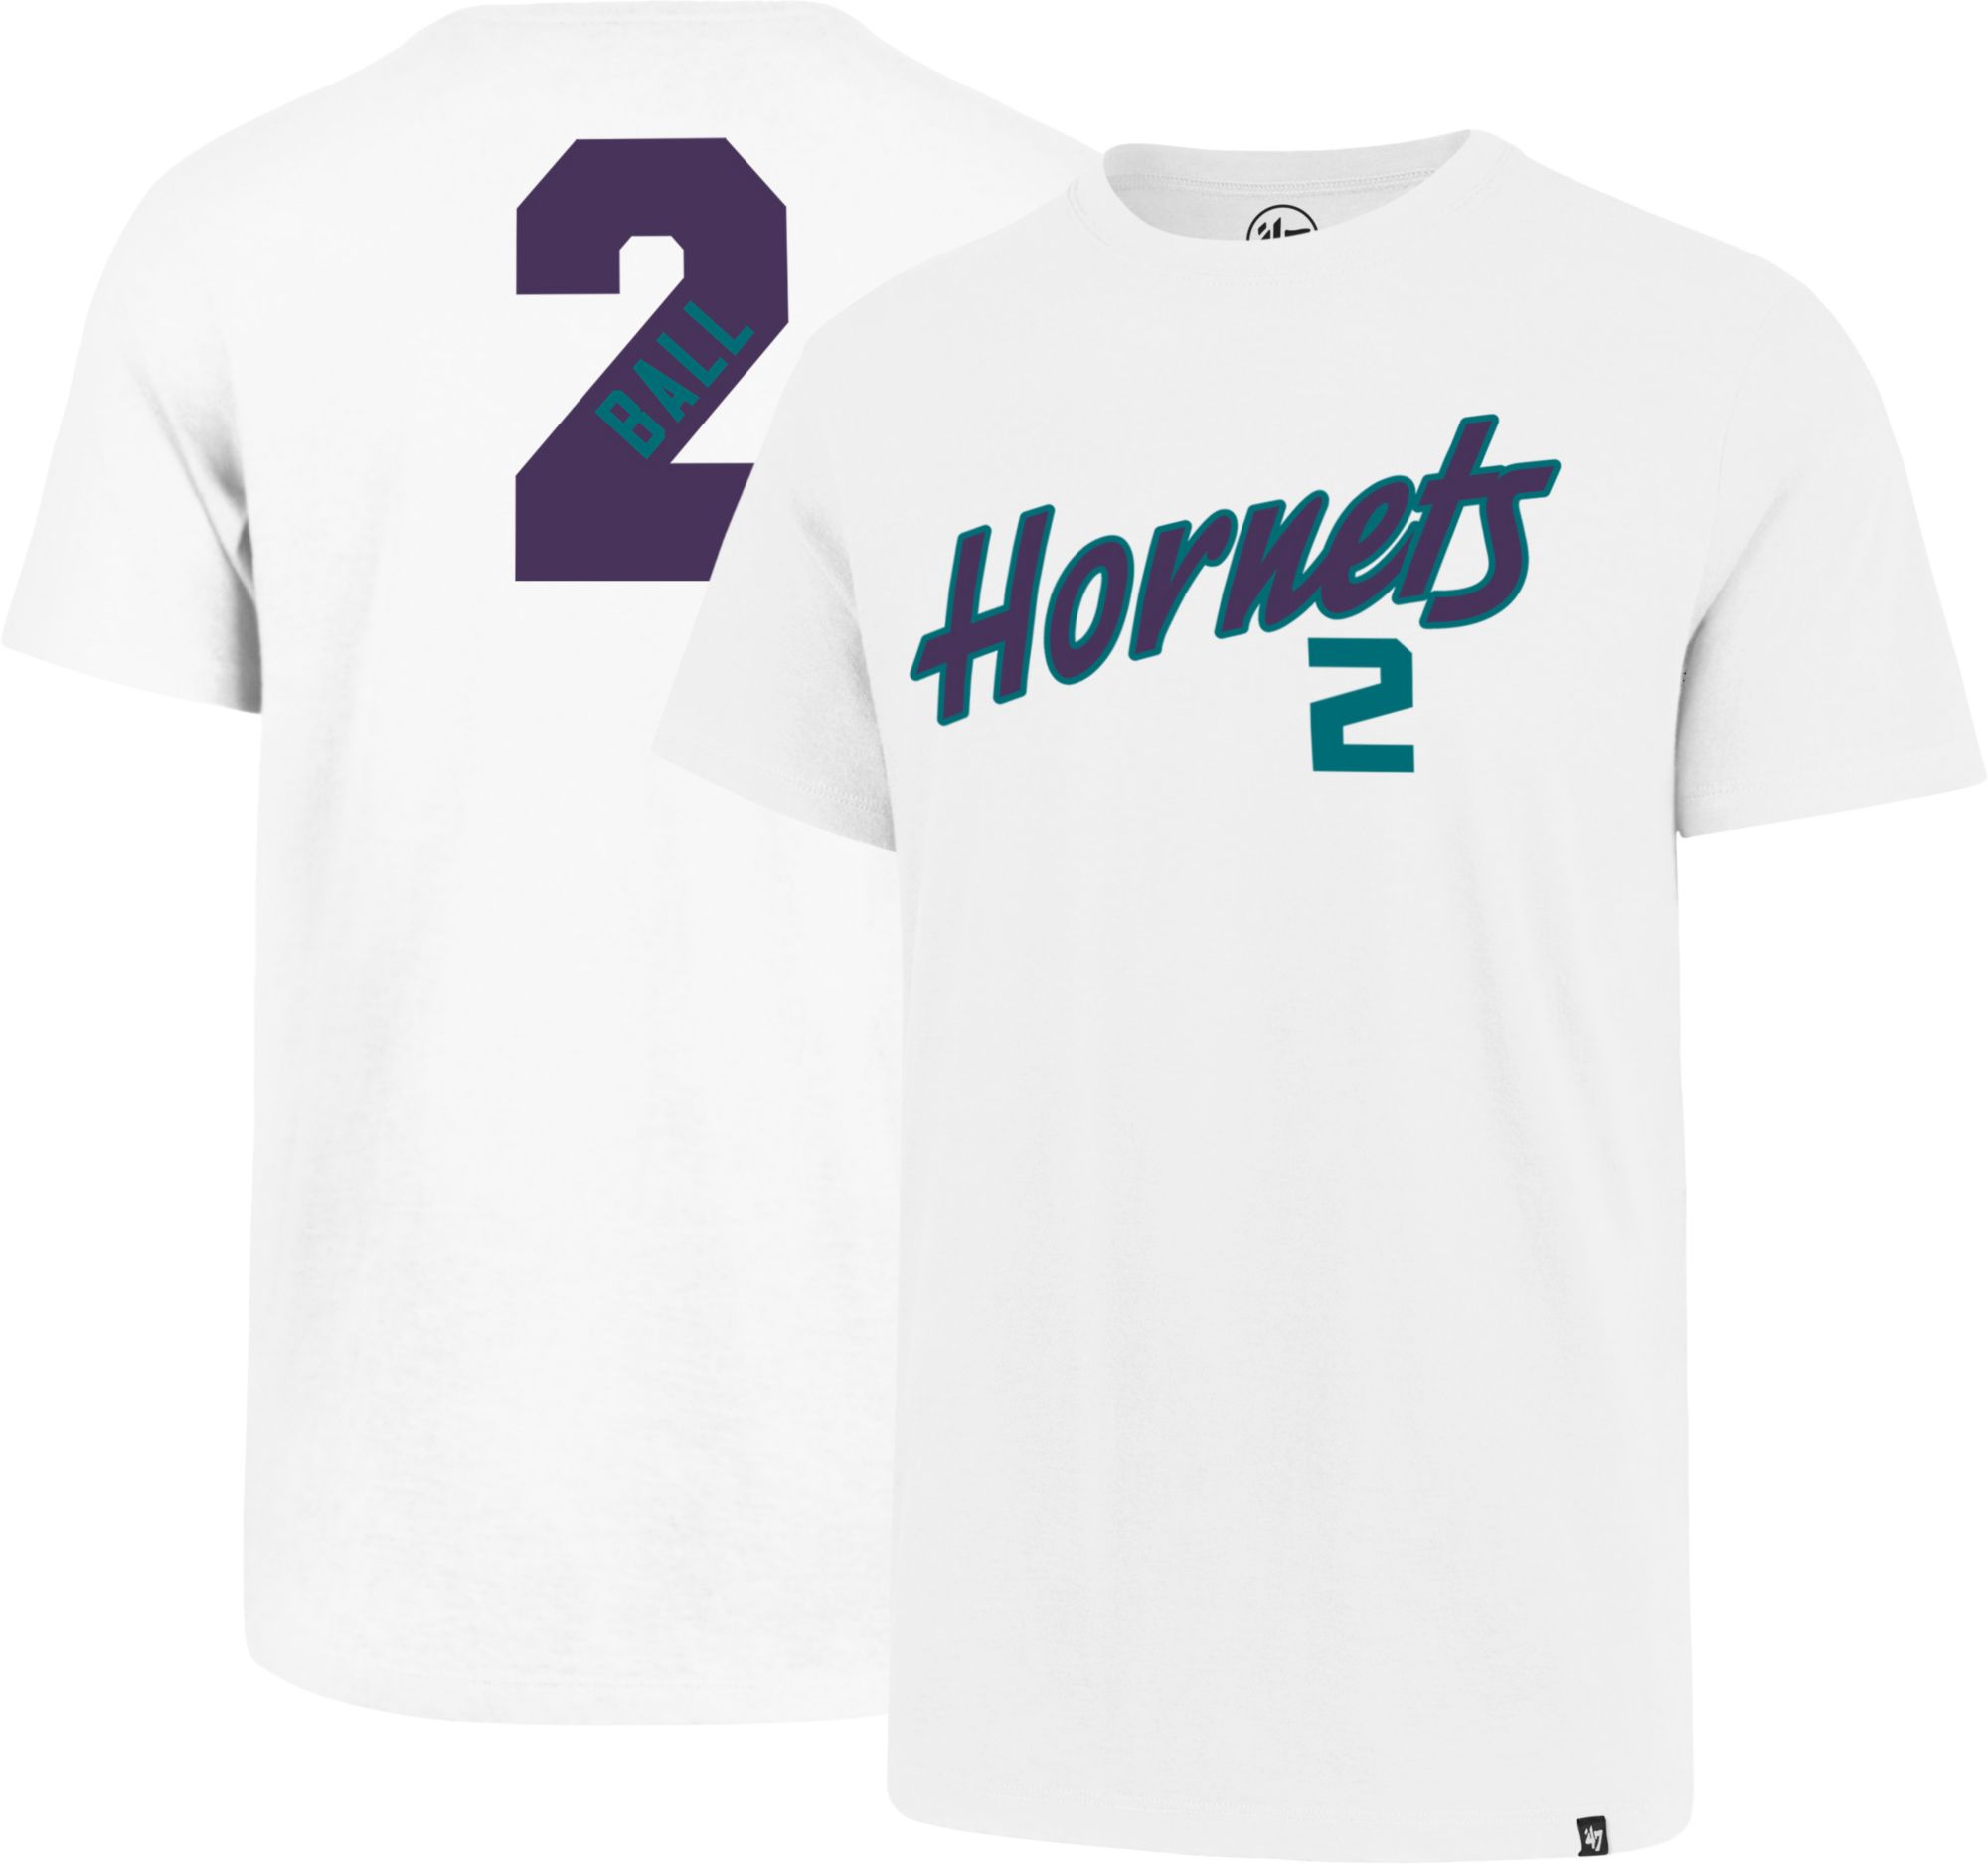 Charlotte Hornets Apparel & Gear  Curbside Pickup Available at DICK'S